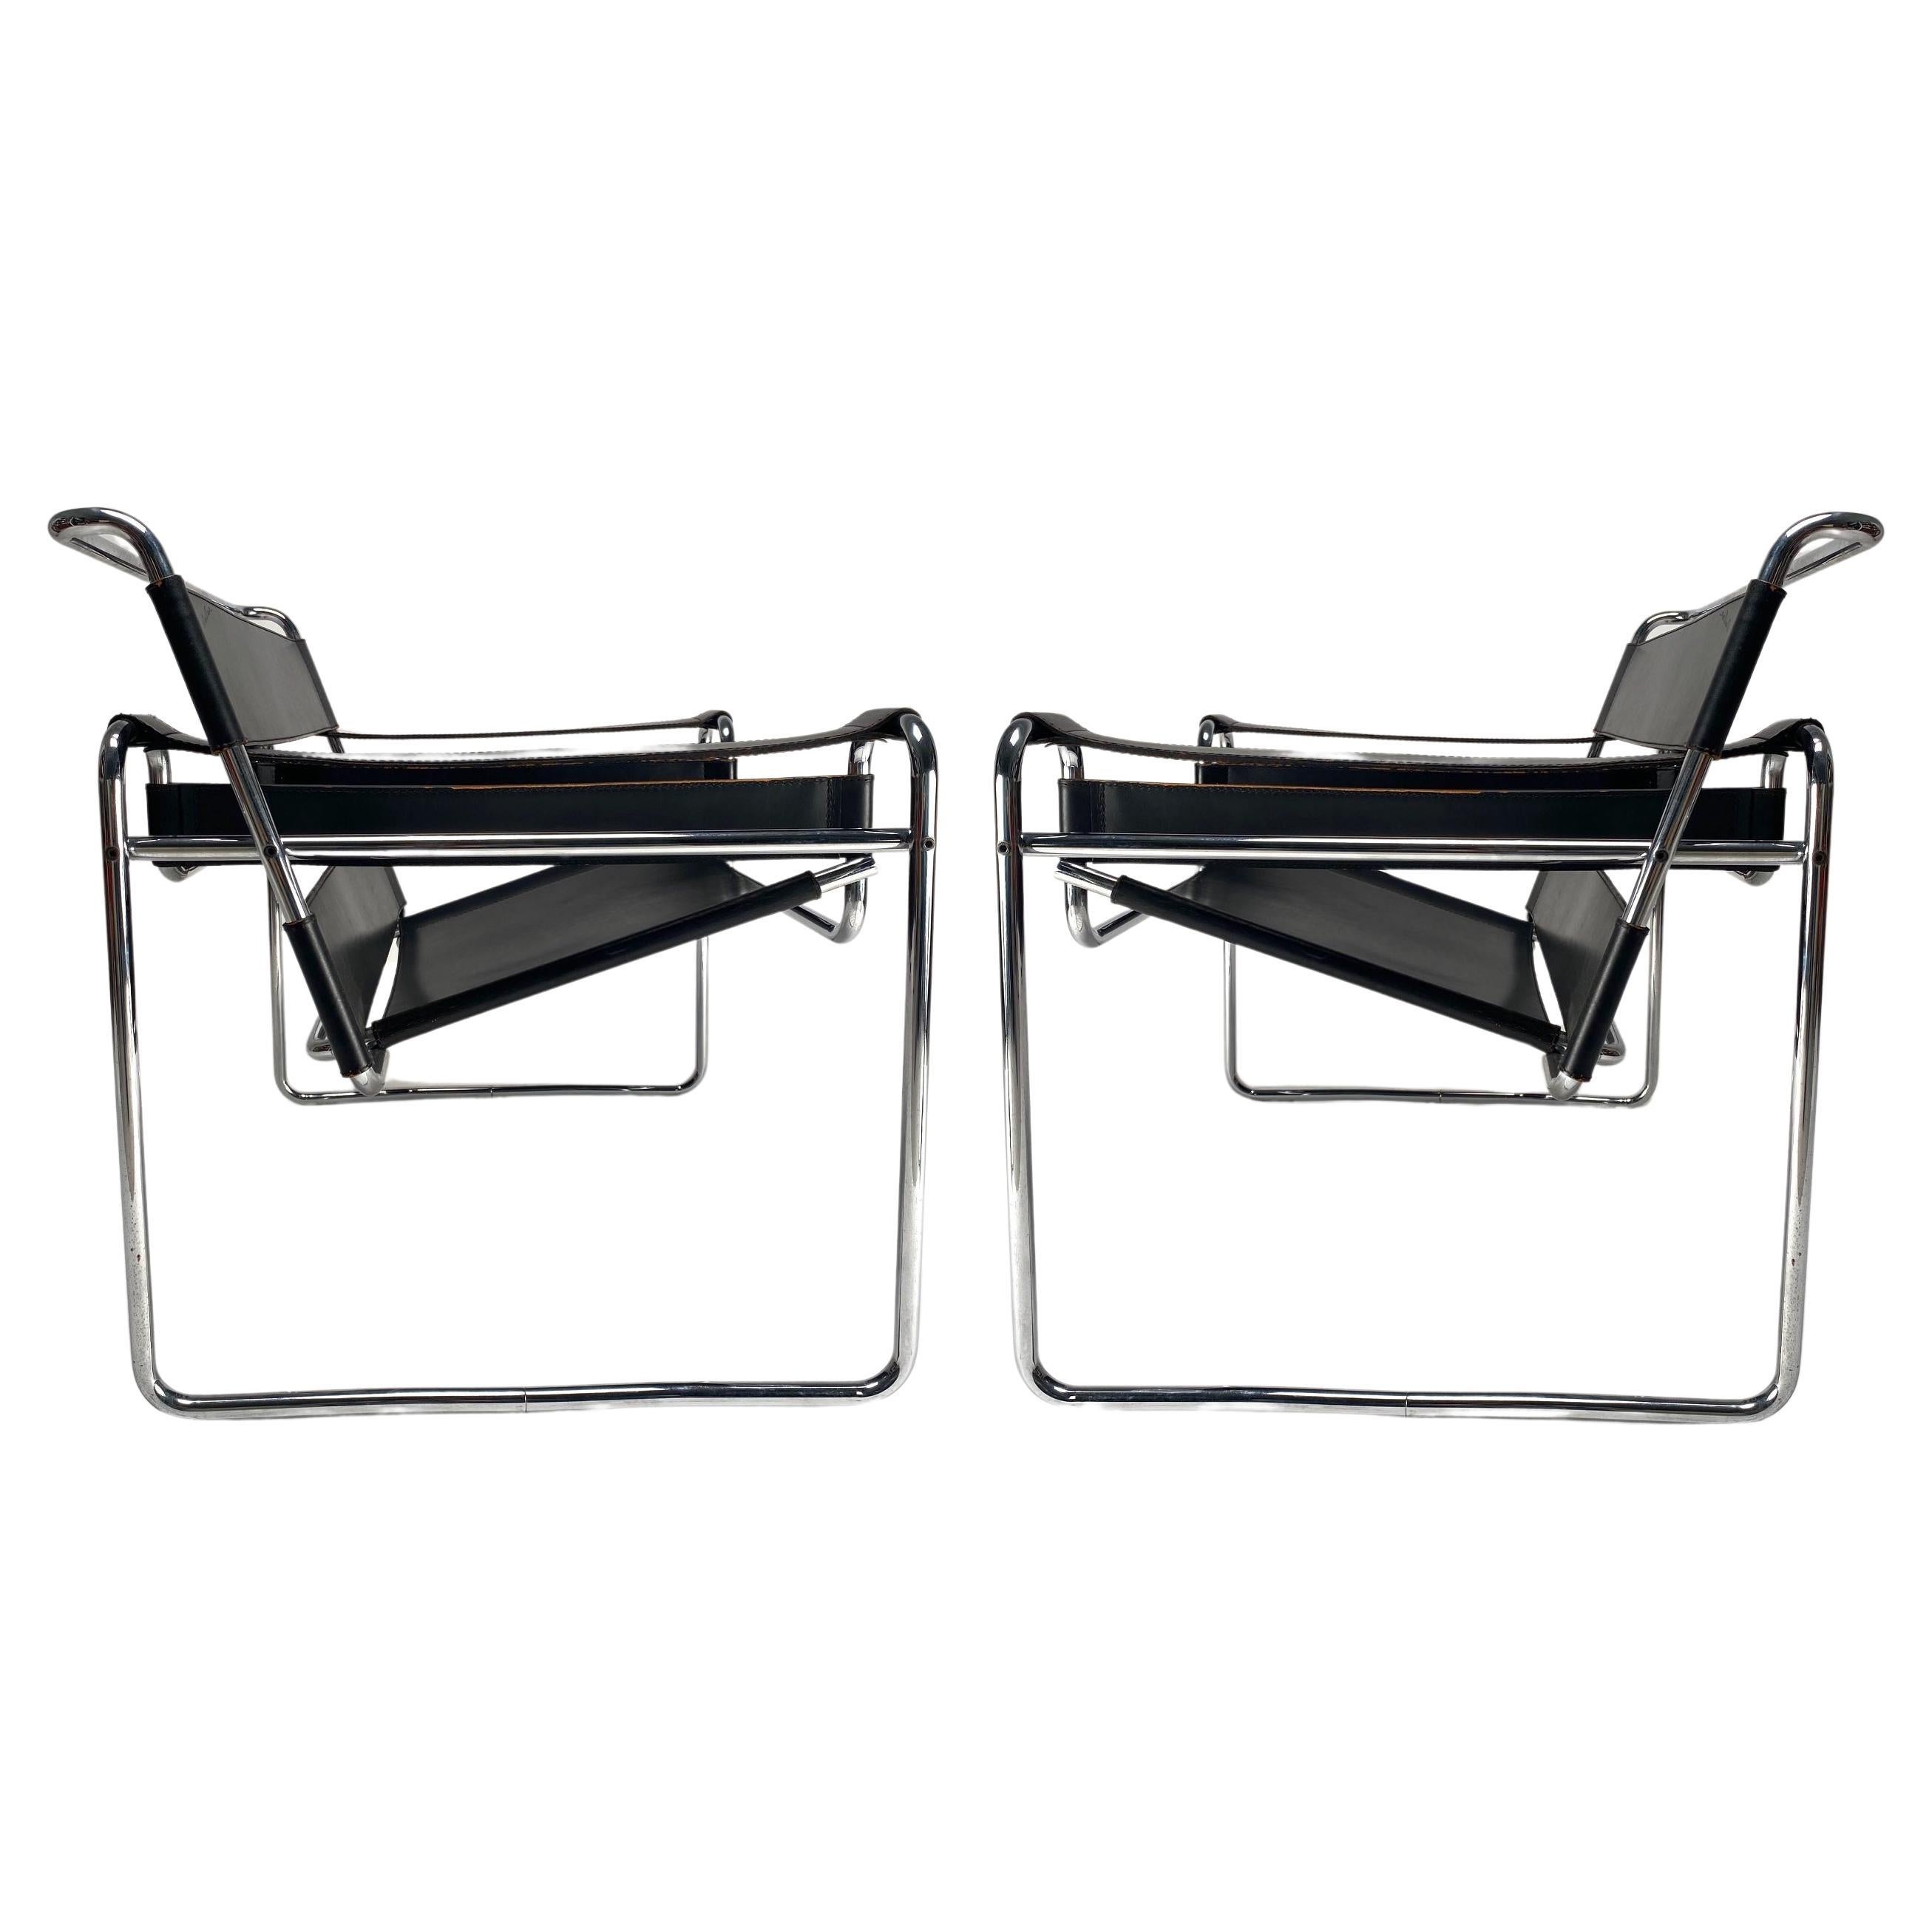 Original Wassilly Armchairs by Marcel Breuer for Gavina, 1970s (Signed)